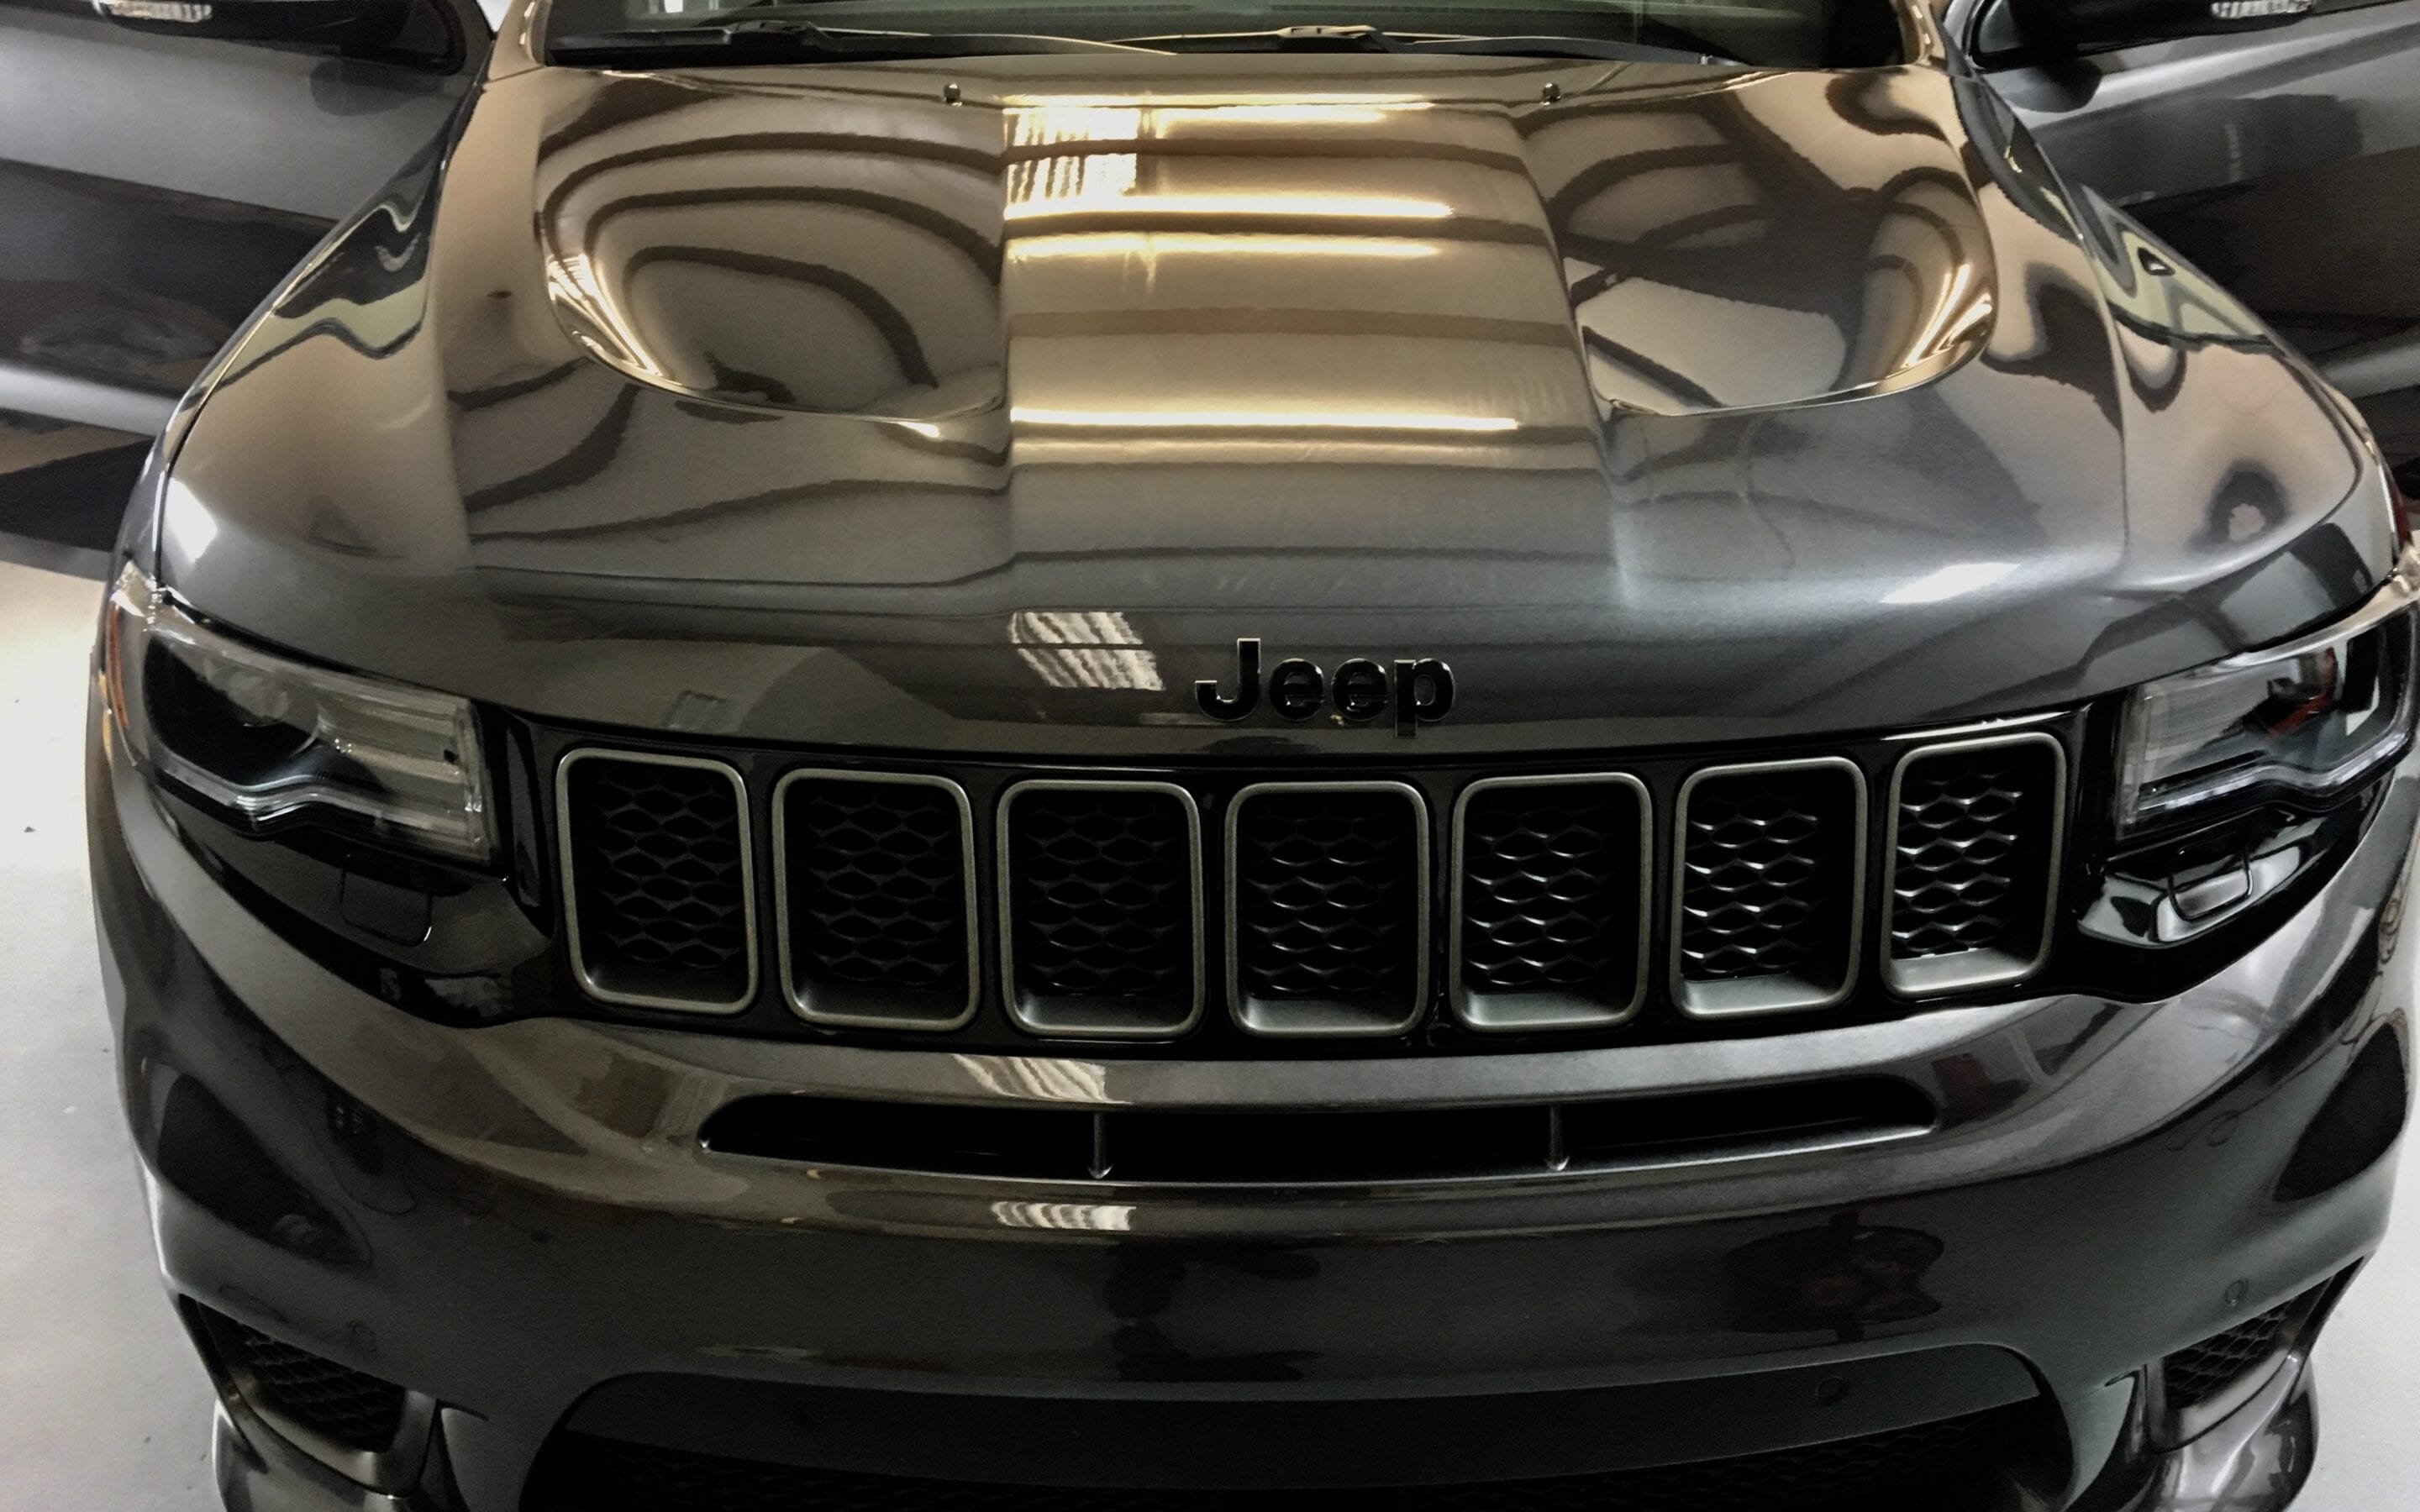 Photos of finished 2018 Jeep Cherokee TrackHawk